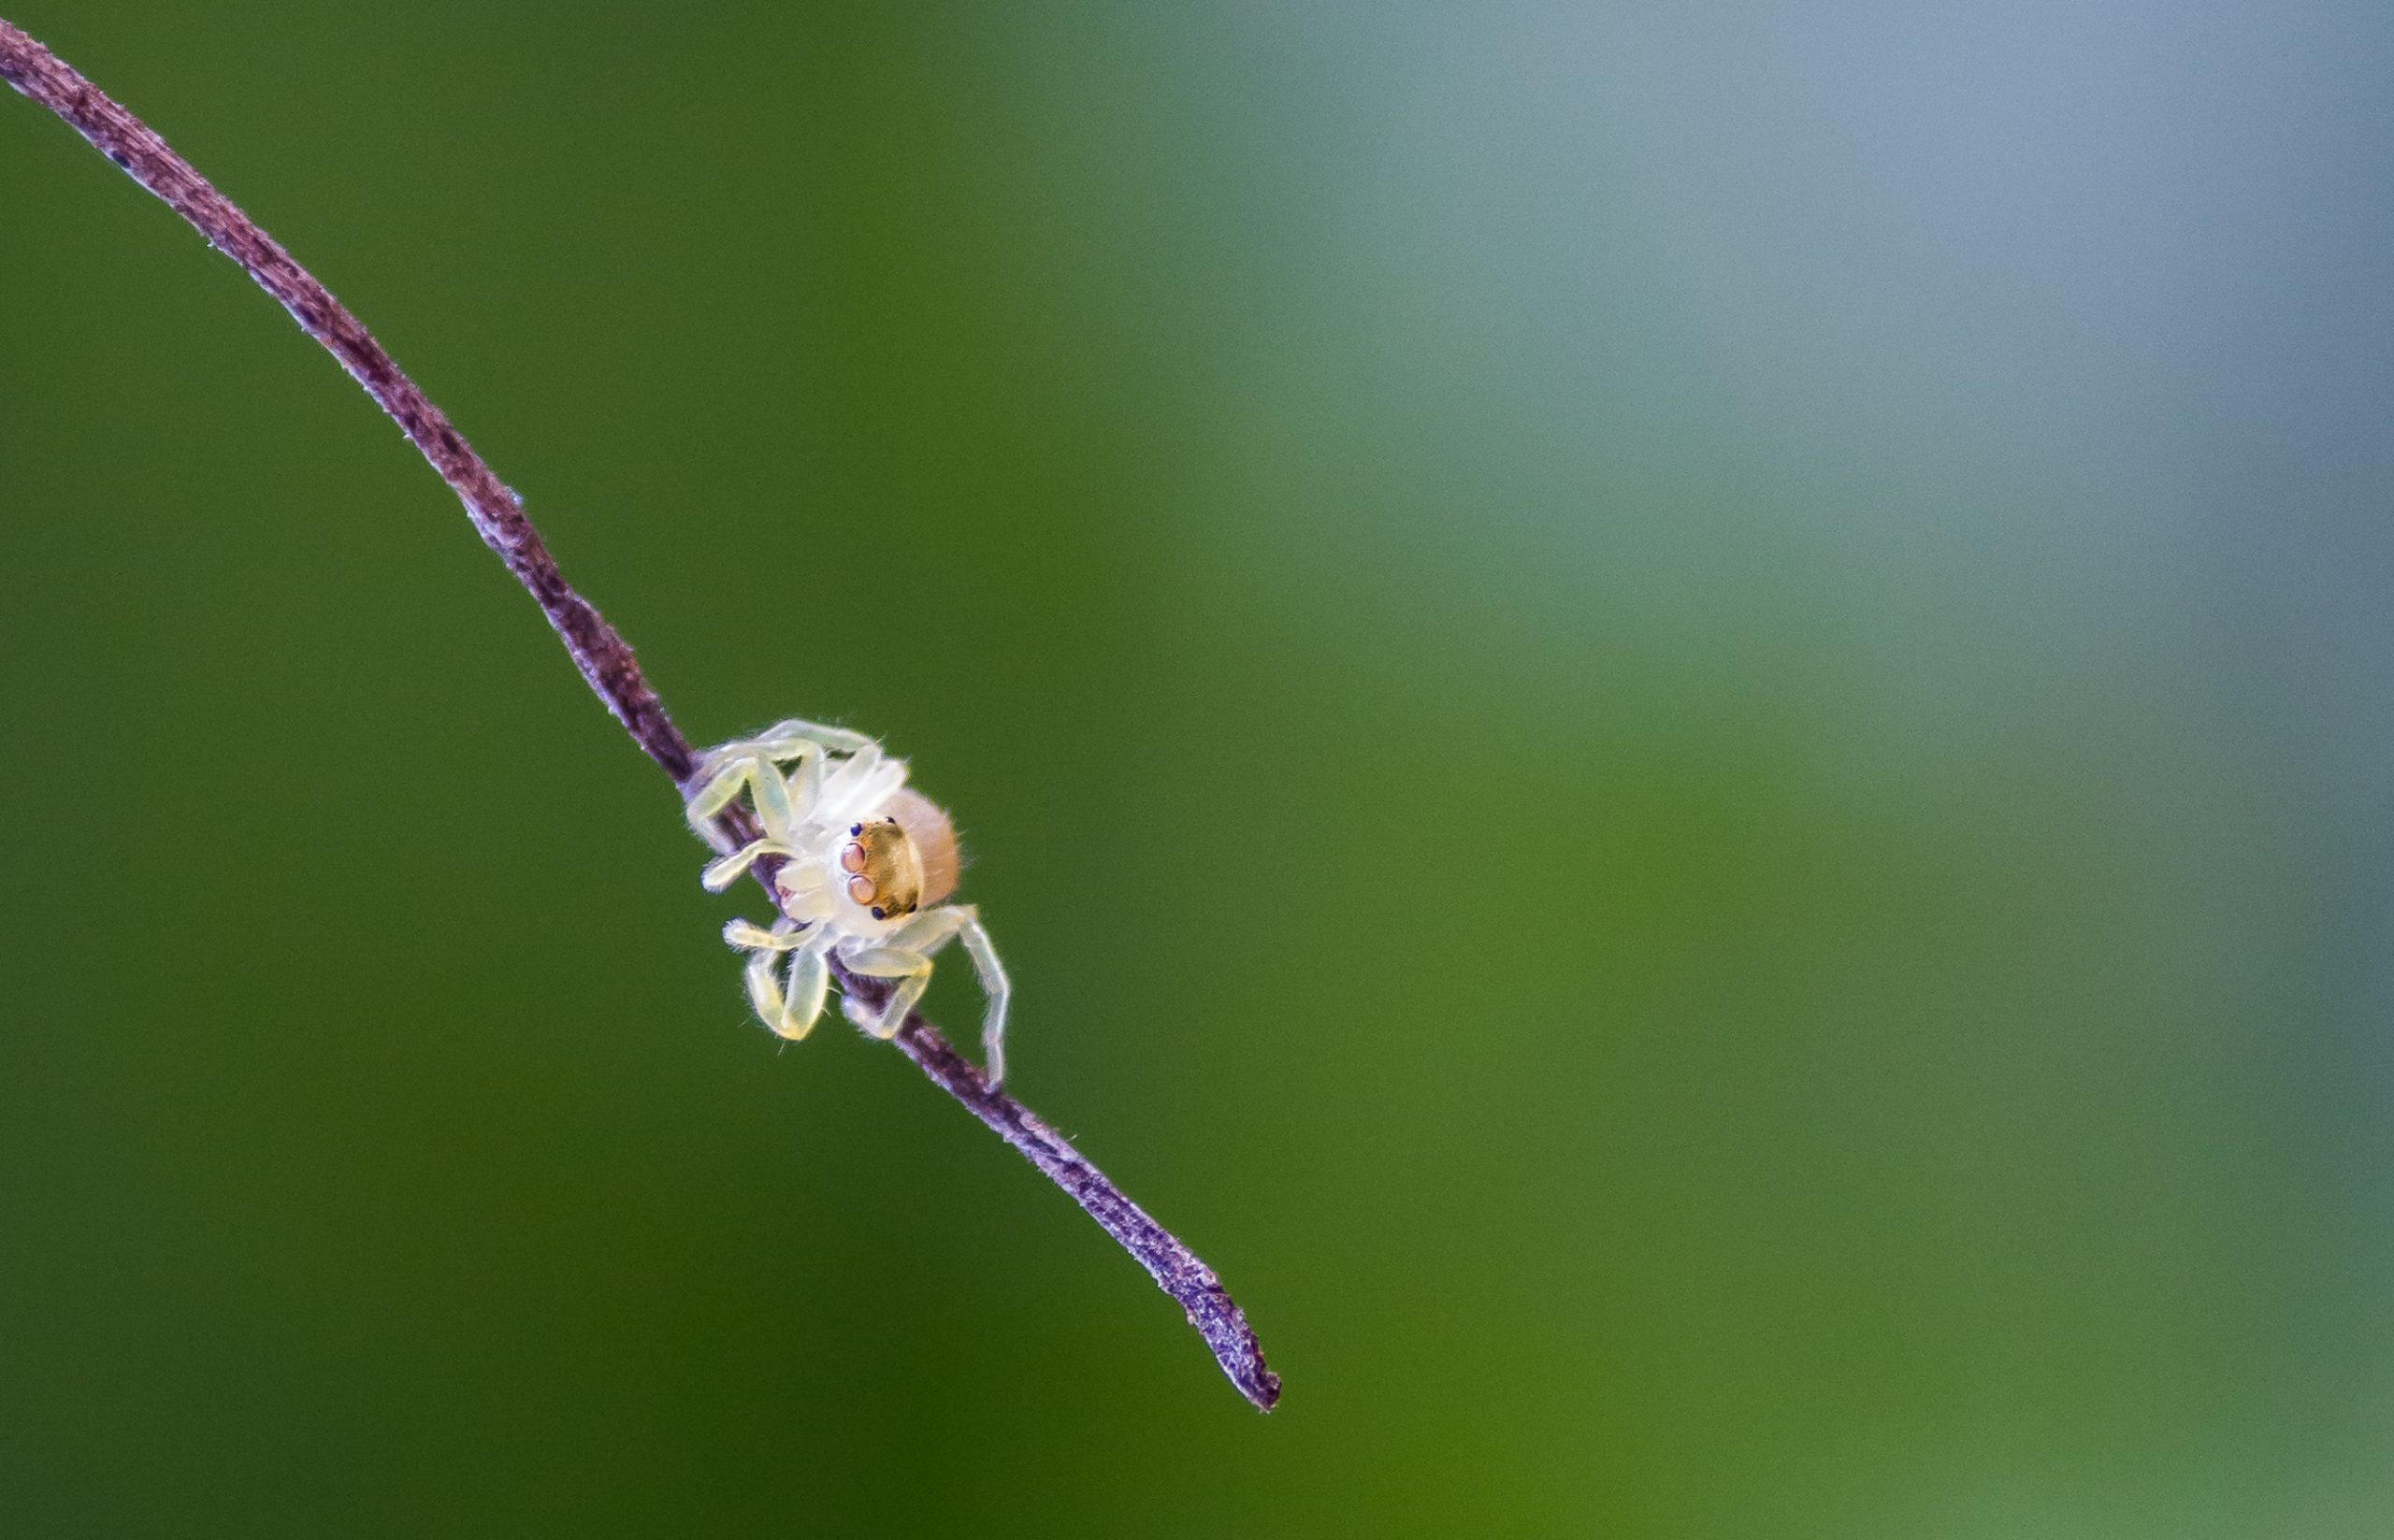 A tiny jumping spider on a twig